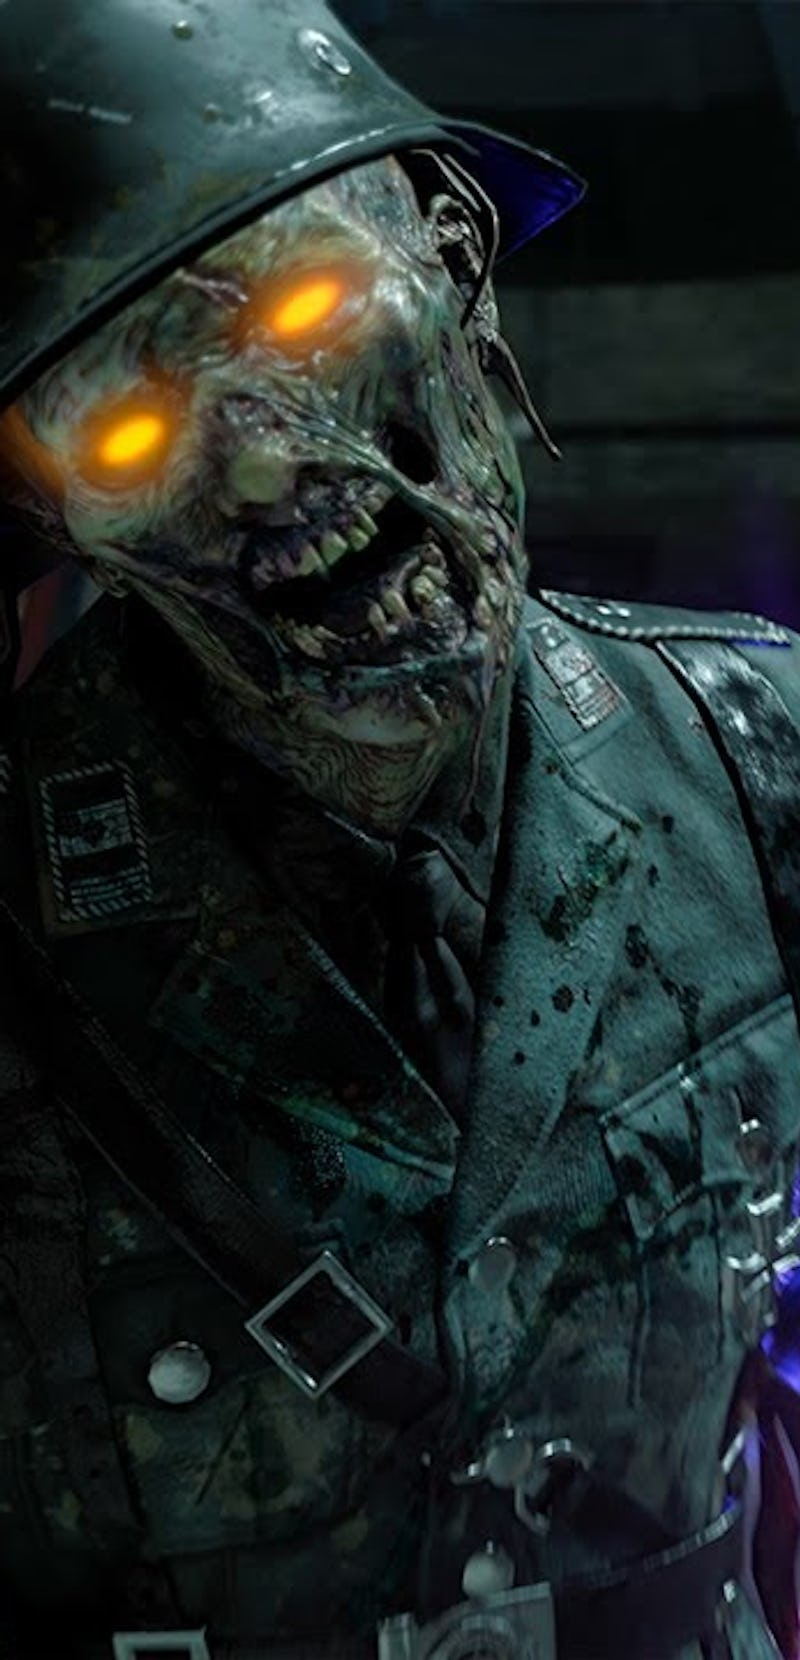 call of duty black ops cold war zombie